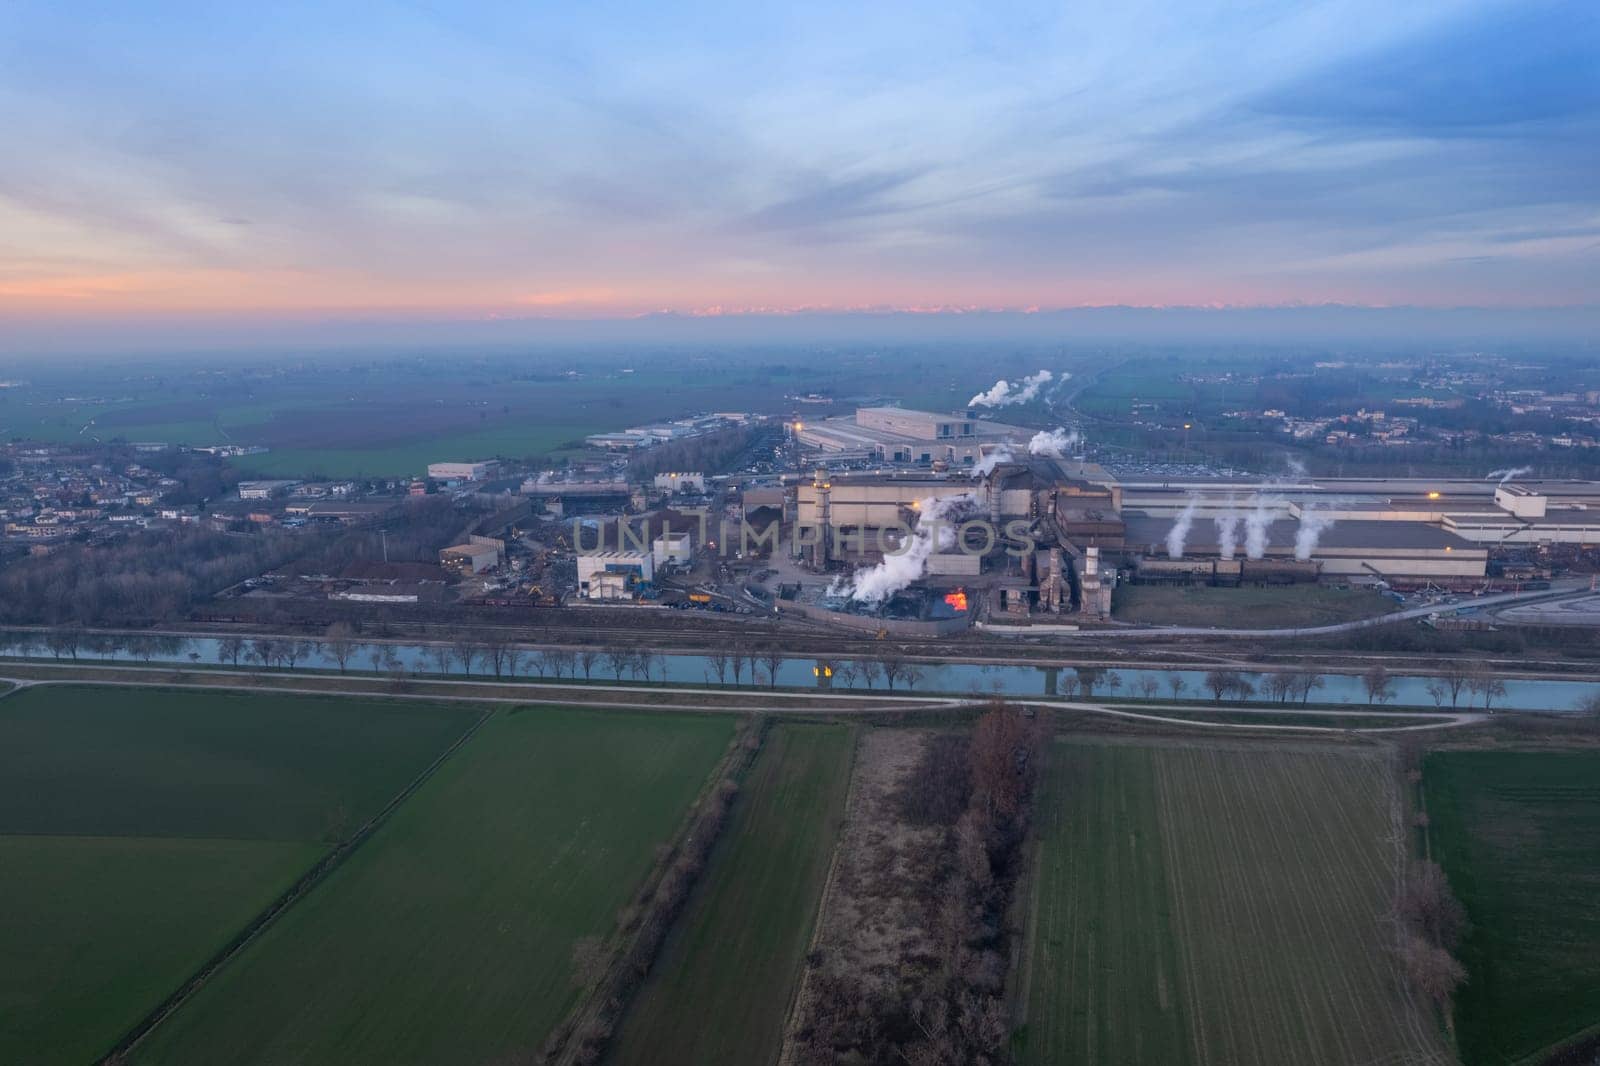 Cremona, Italy - January 2022 Drone aerial view of Arvedi working steel plant at dawn, industrial zone in Spinadesco, Cremona, Lombardy Italy